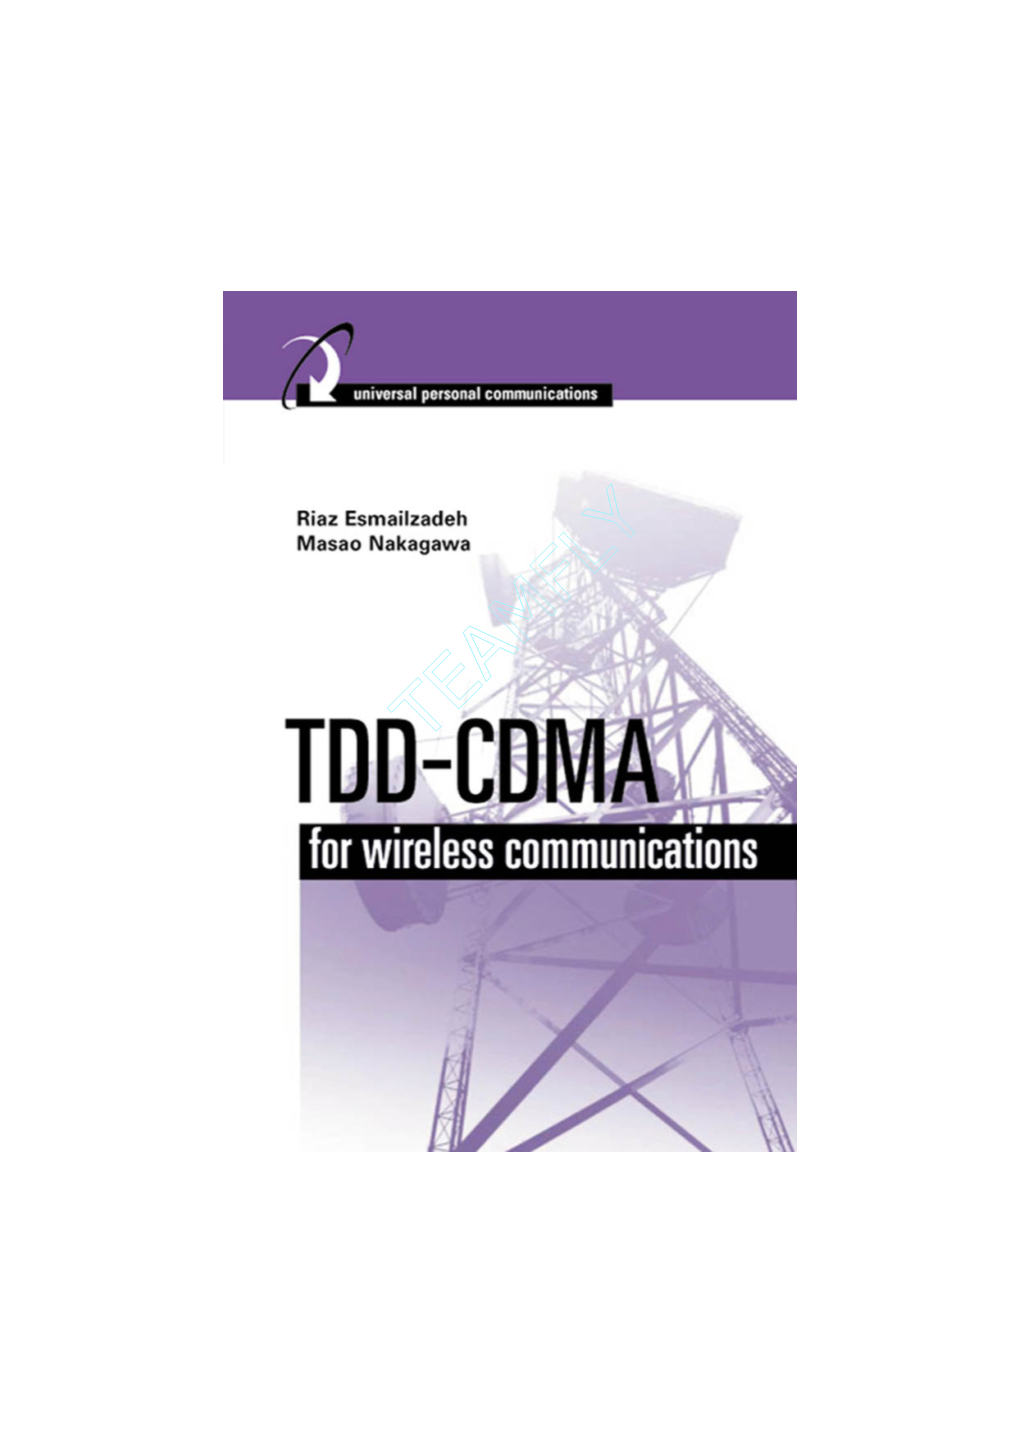 TDD-CDMA for Wireless Communications for a Listing of Recent Titles in the Artech House Universal Personal Communications Series, Turn to the Back of This Book